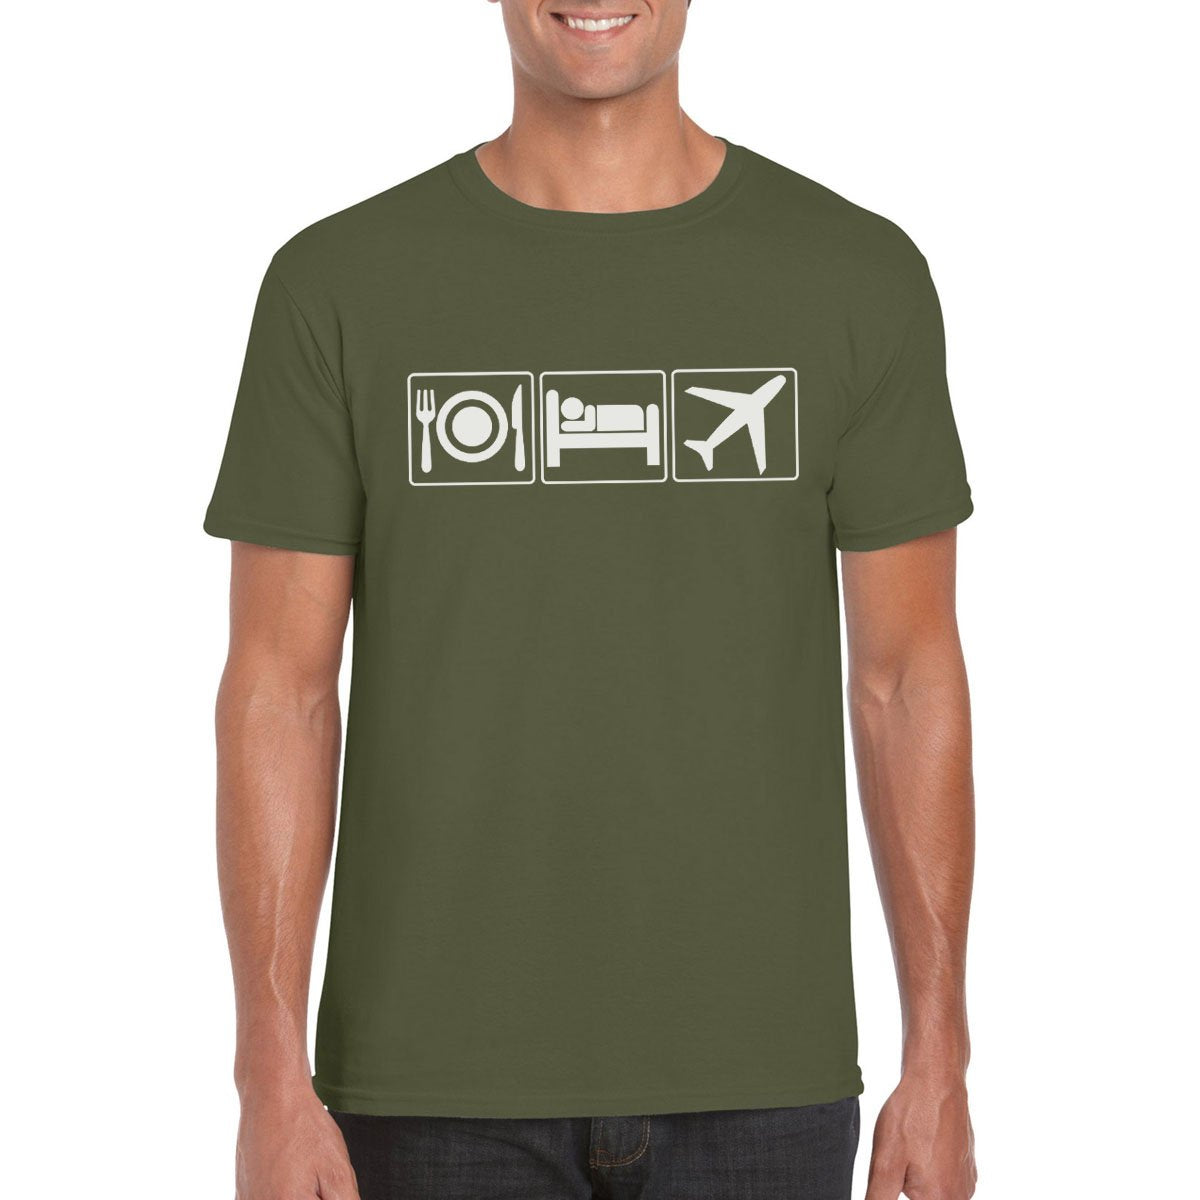 EAT SLEEP FLY Semi-Fitted Unisex T-Shirt